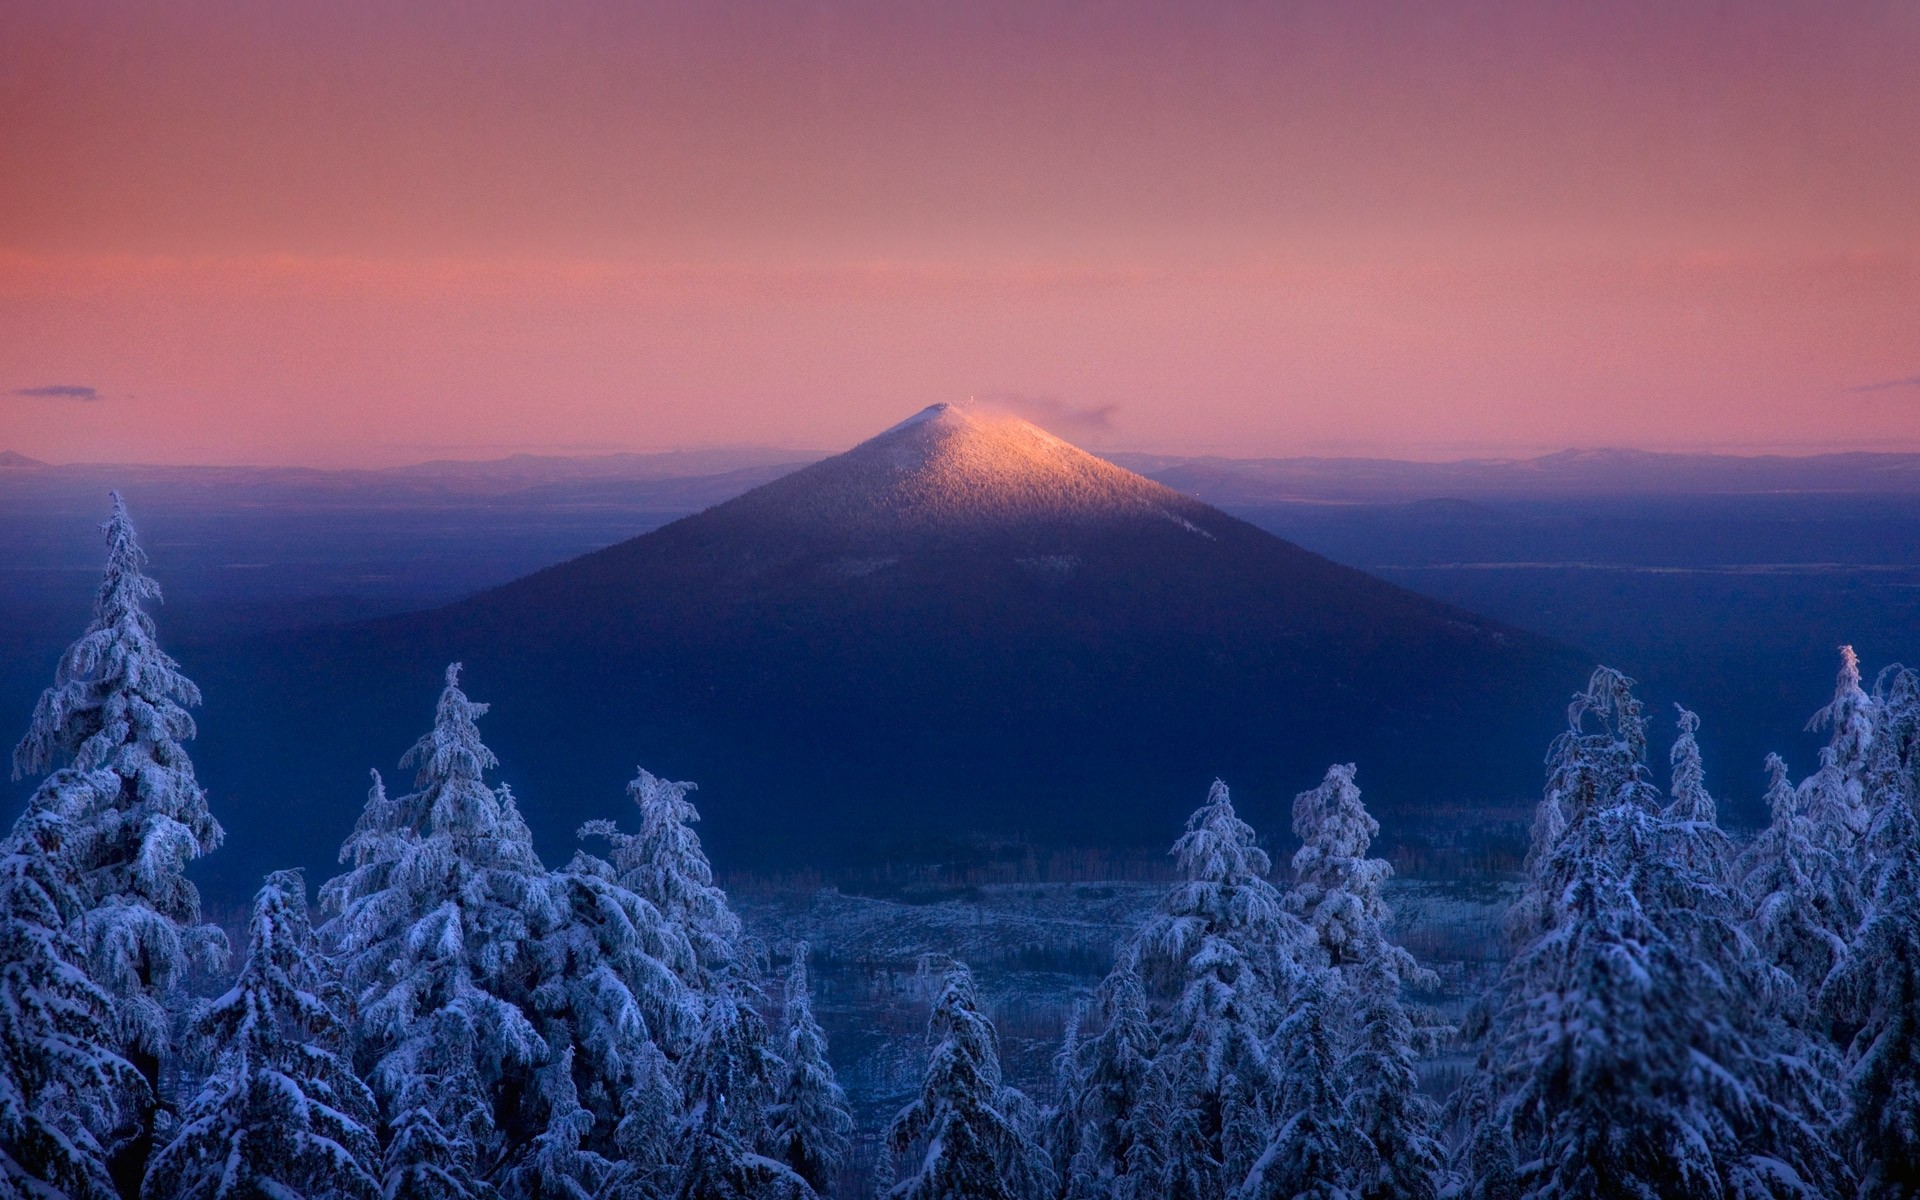 General 1920x1200 volcano Oregon sunset forest snow mountains trees snowy peak nature winter landscape USA cold frost ice sky